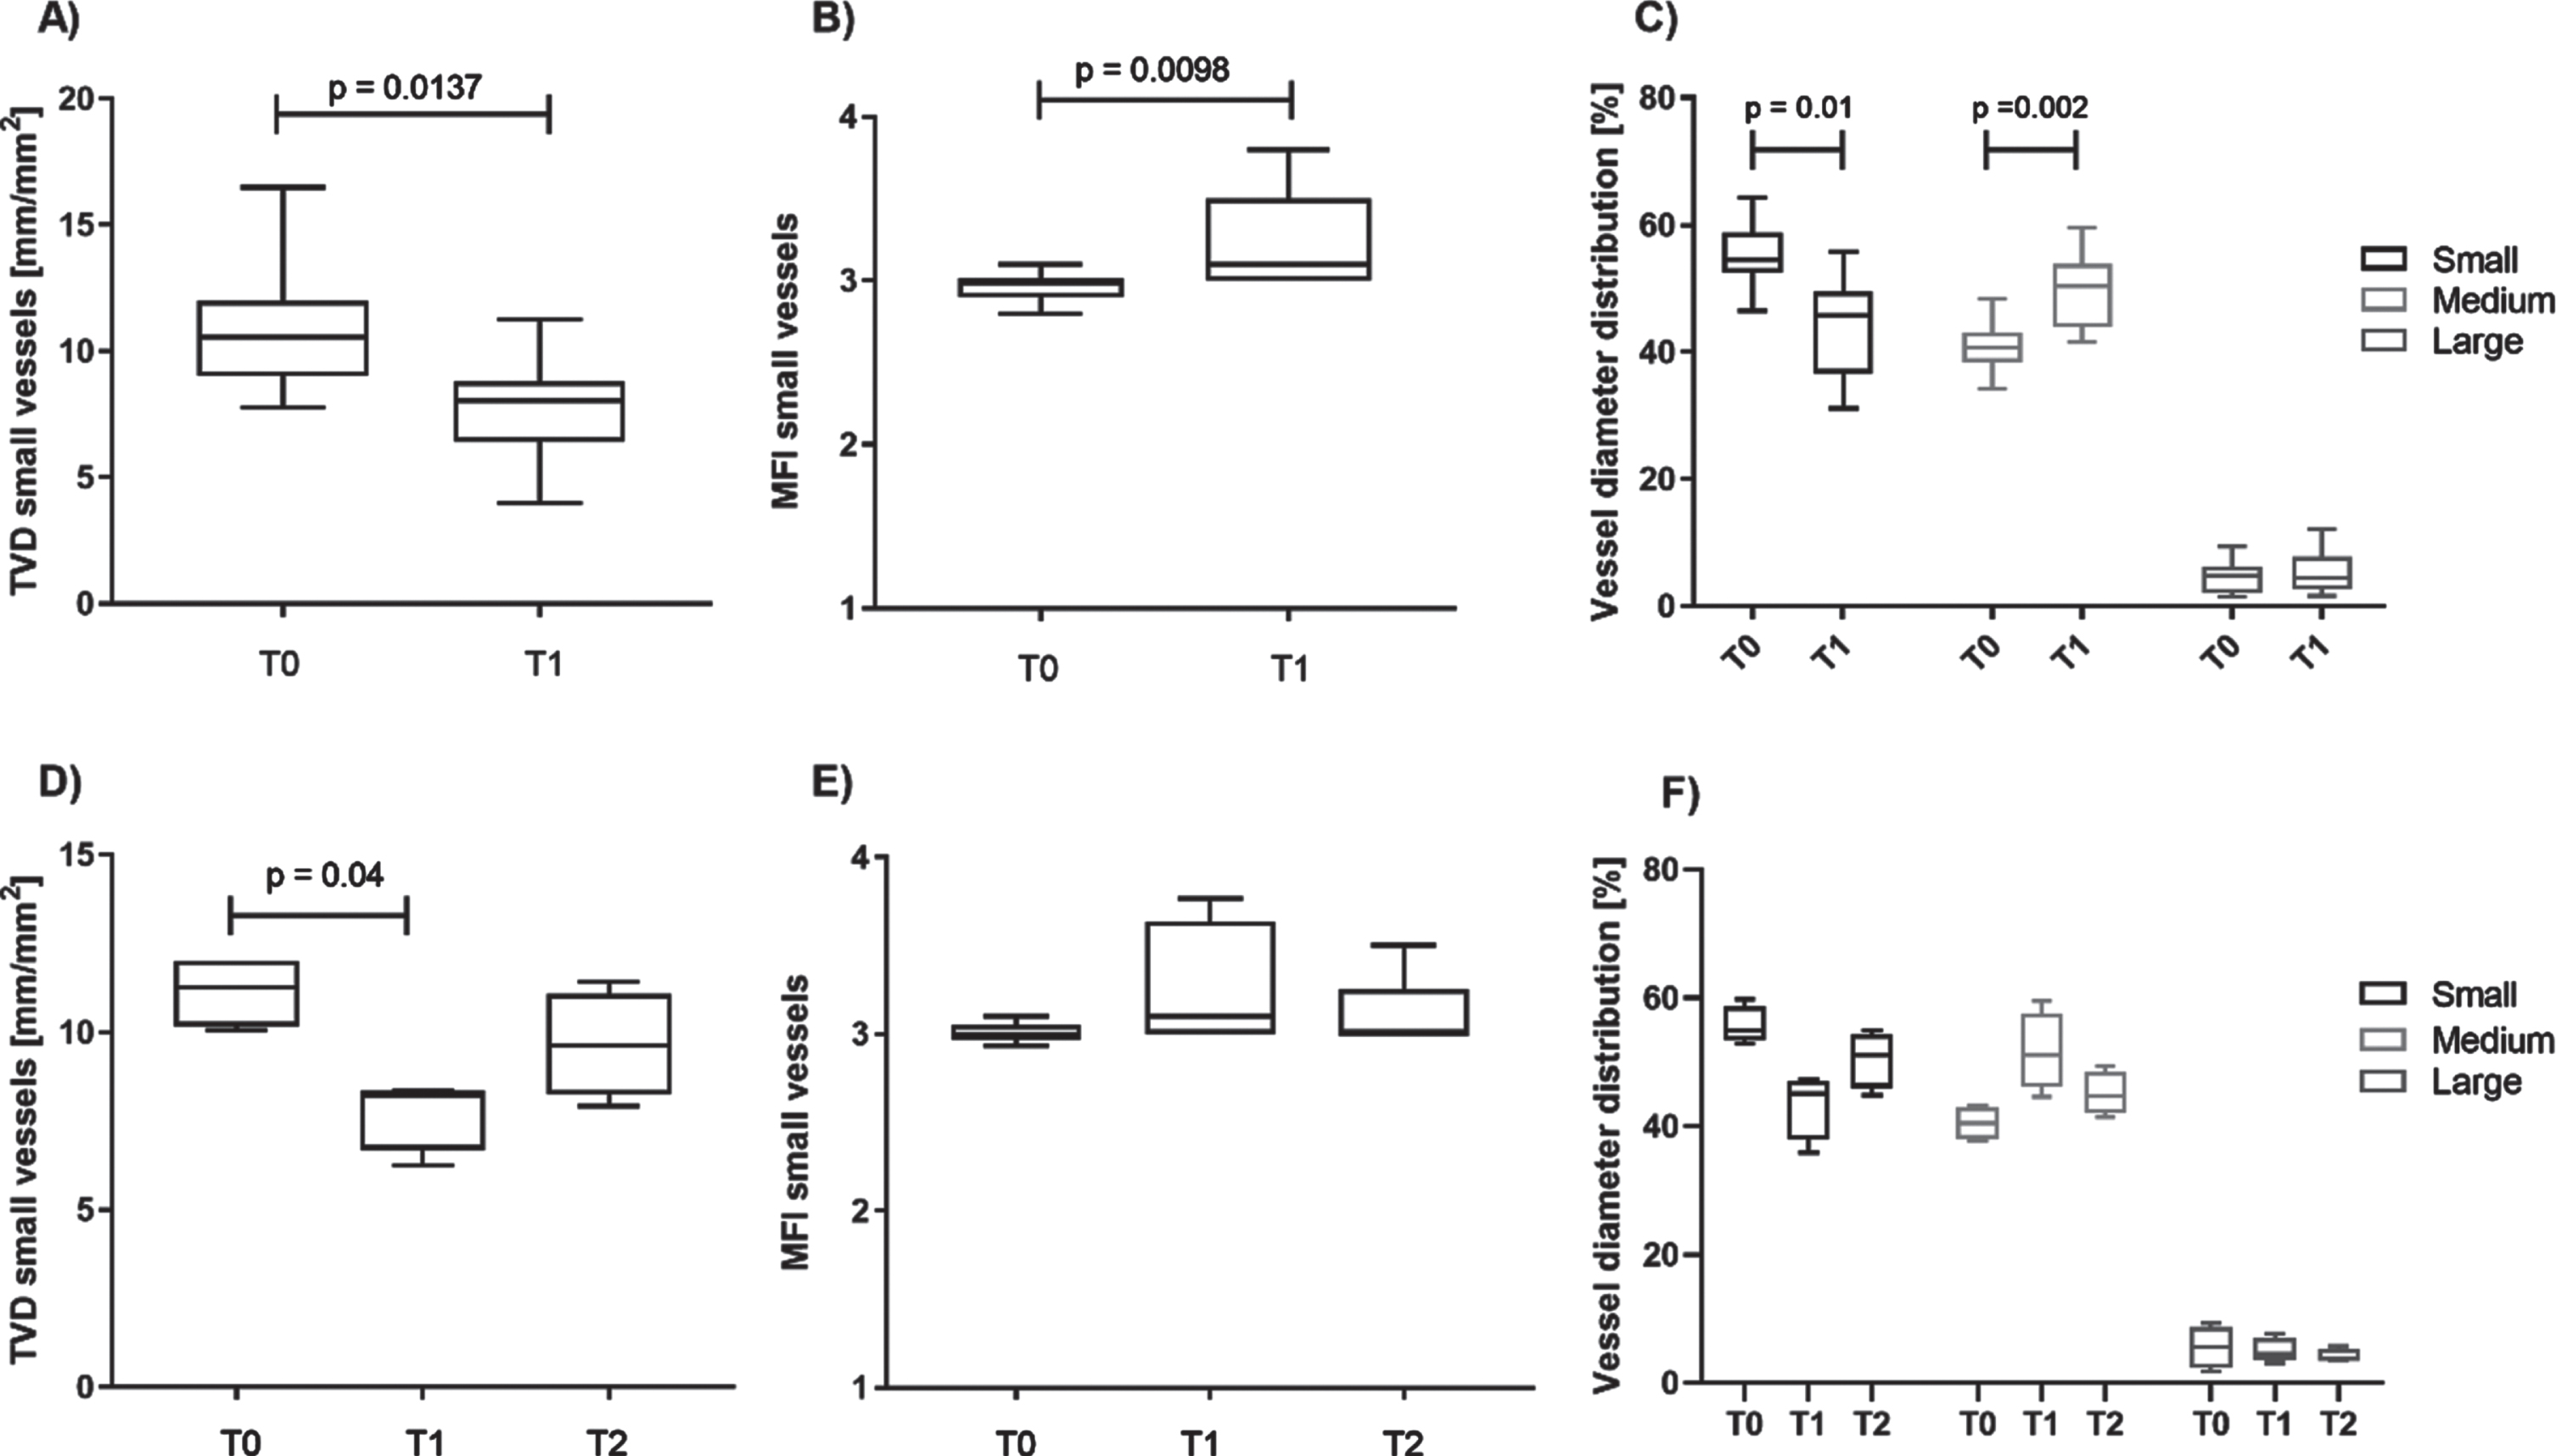 Perioperative changes of microcirculatory parameters in sublingual vessels. Panels A-C include data of all children (n = 11), panels D-F include data from a subgroup of children (n = 6) with recordings available at timepoint T2. Small vessel density (A) decreased and the microvascular flow in small vessels (B) increased significantly from T0 to T1. The proportion of small vessels (<10 μm diameter) decreased significantly during surgery, while the proportion of medium vessels (10-25 μm diameter) increased significantly (C). Follow-up recordings 6 h post-surgery (T2) demonstrate a return of small vessel density (D), MFI (E), and diameter distribution (F) towards preoperative values.